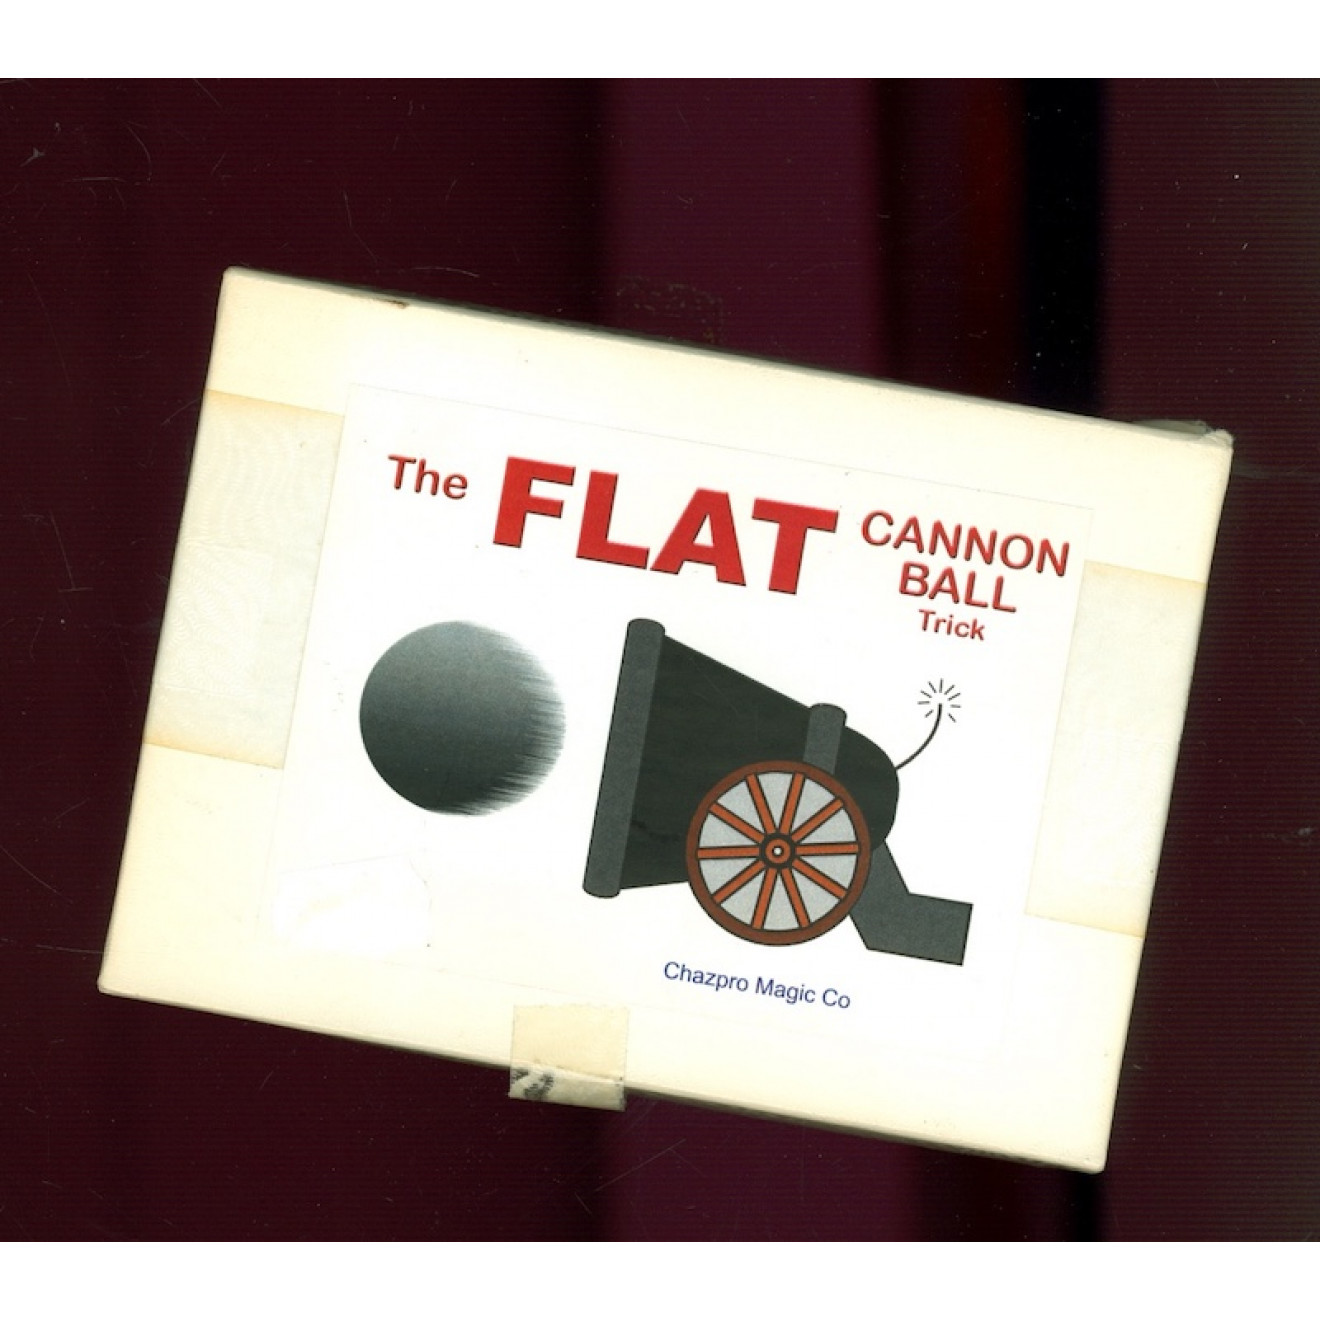 The Flat Cannon Ball